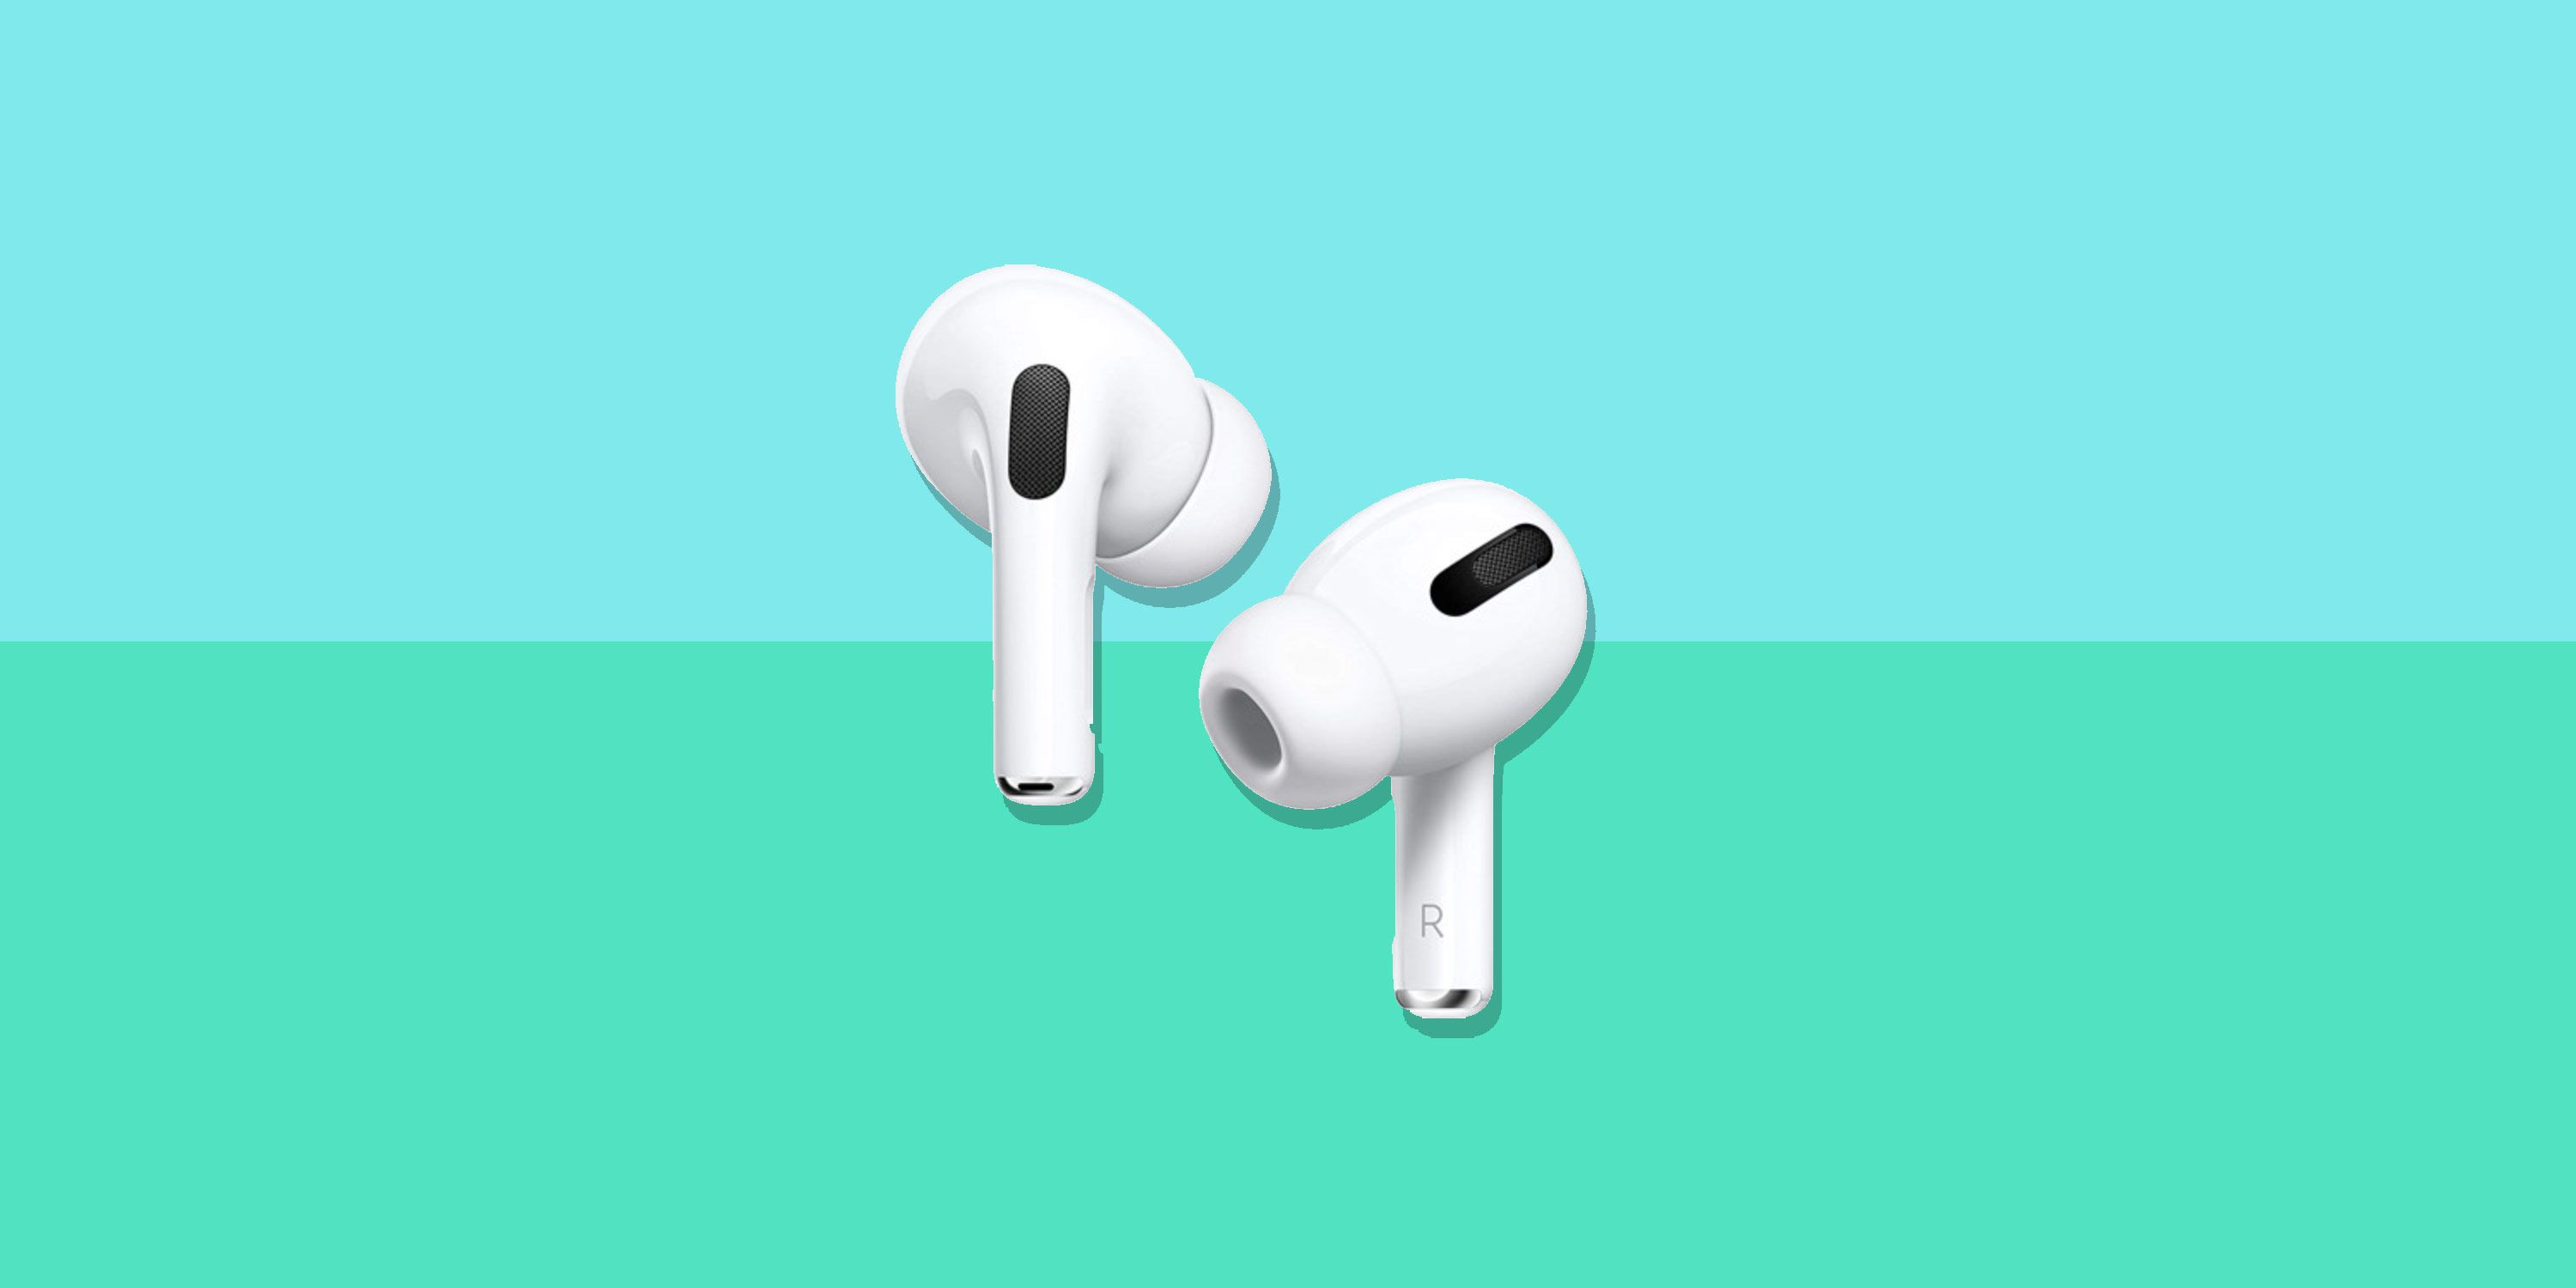 Apple AirPod Pros Sale Woot 2021 | The Strategist